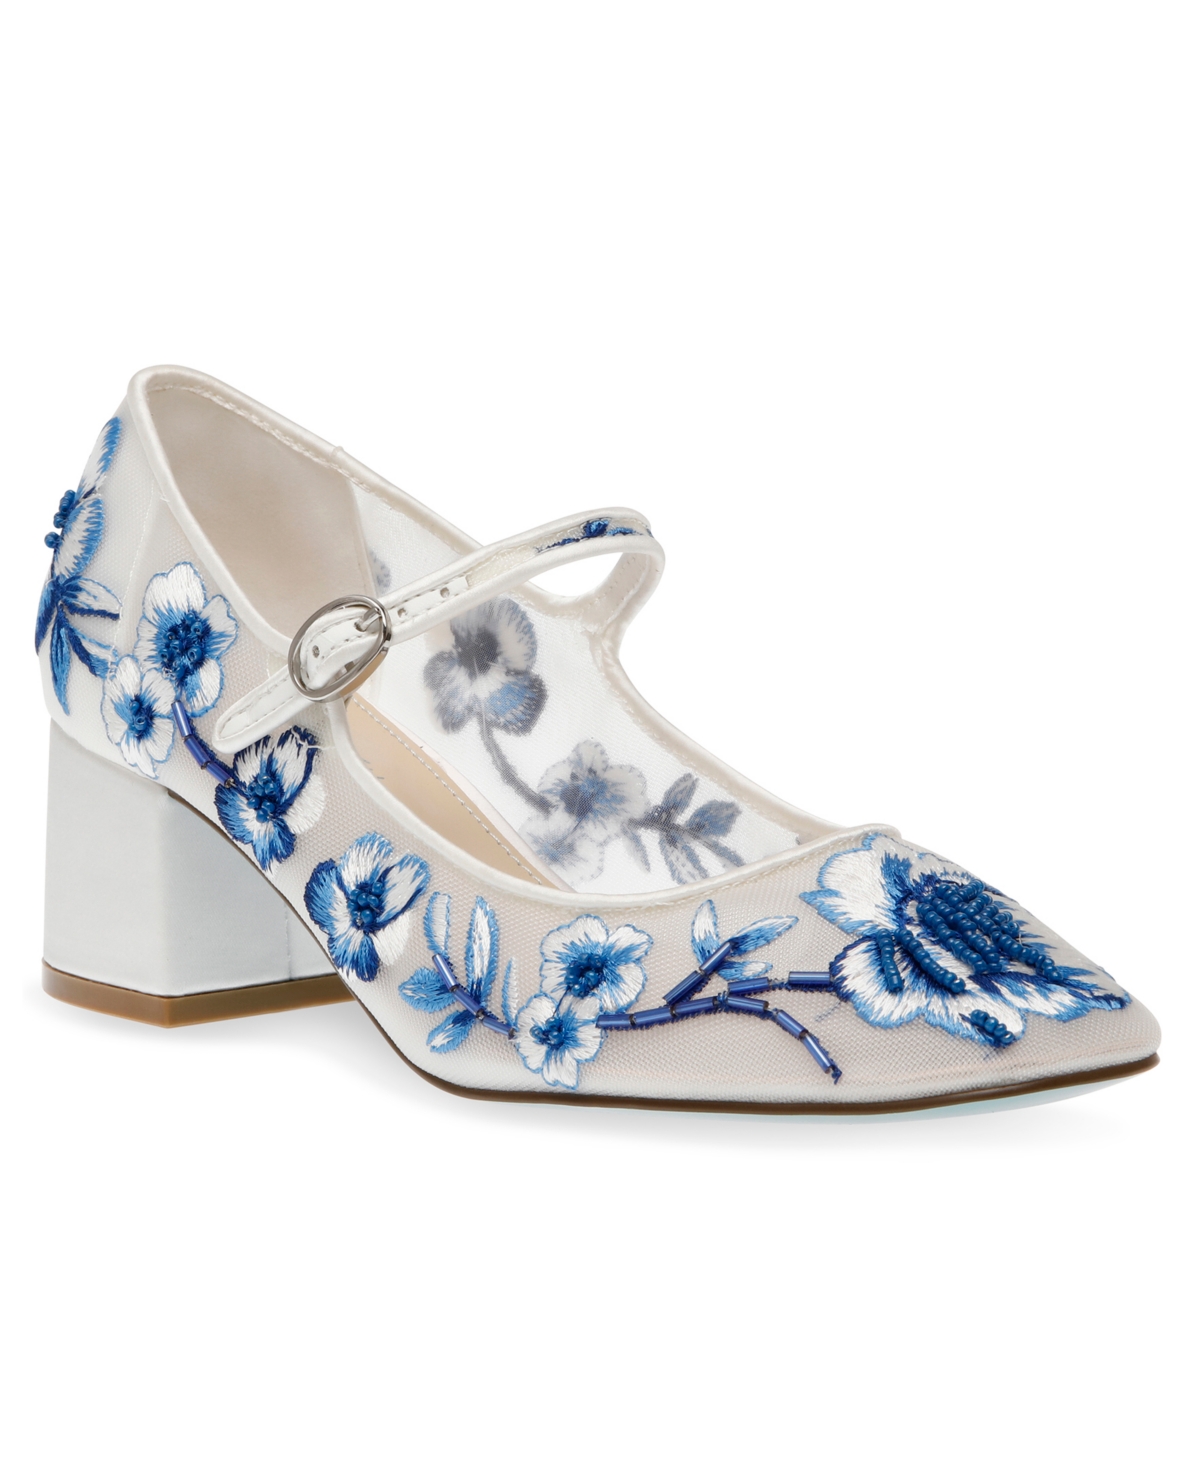 Betsey Johnson Women's Ezra Embroidered Mary Janes In Blue Floral